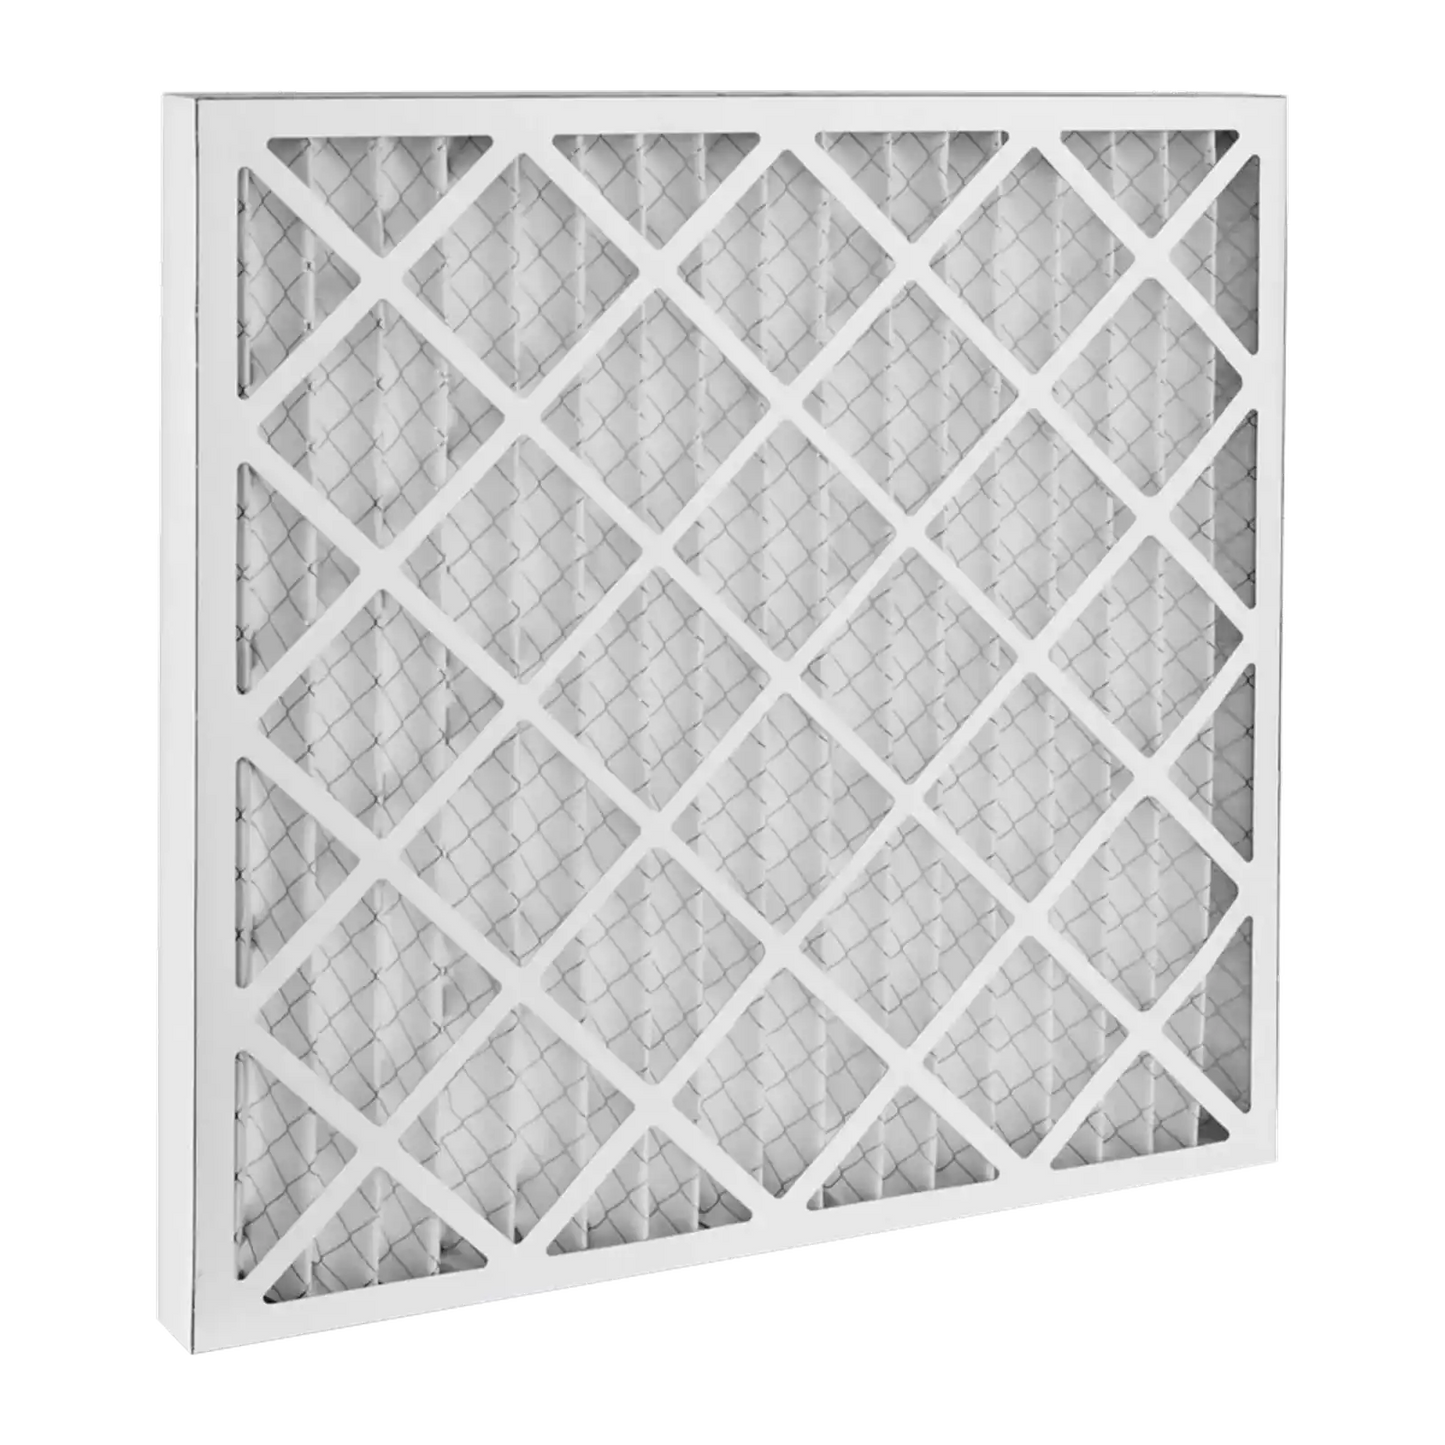 Dafco 18x20x1 Furnace AC Filter - Case of 12